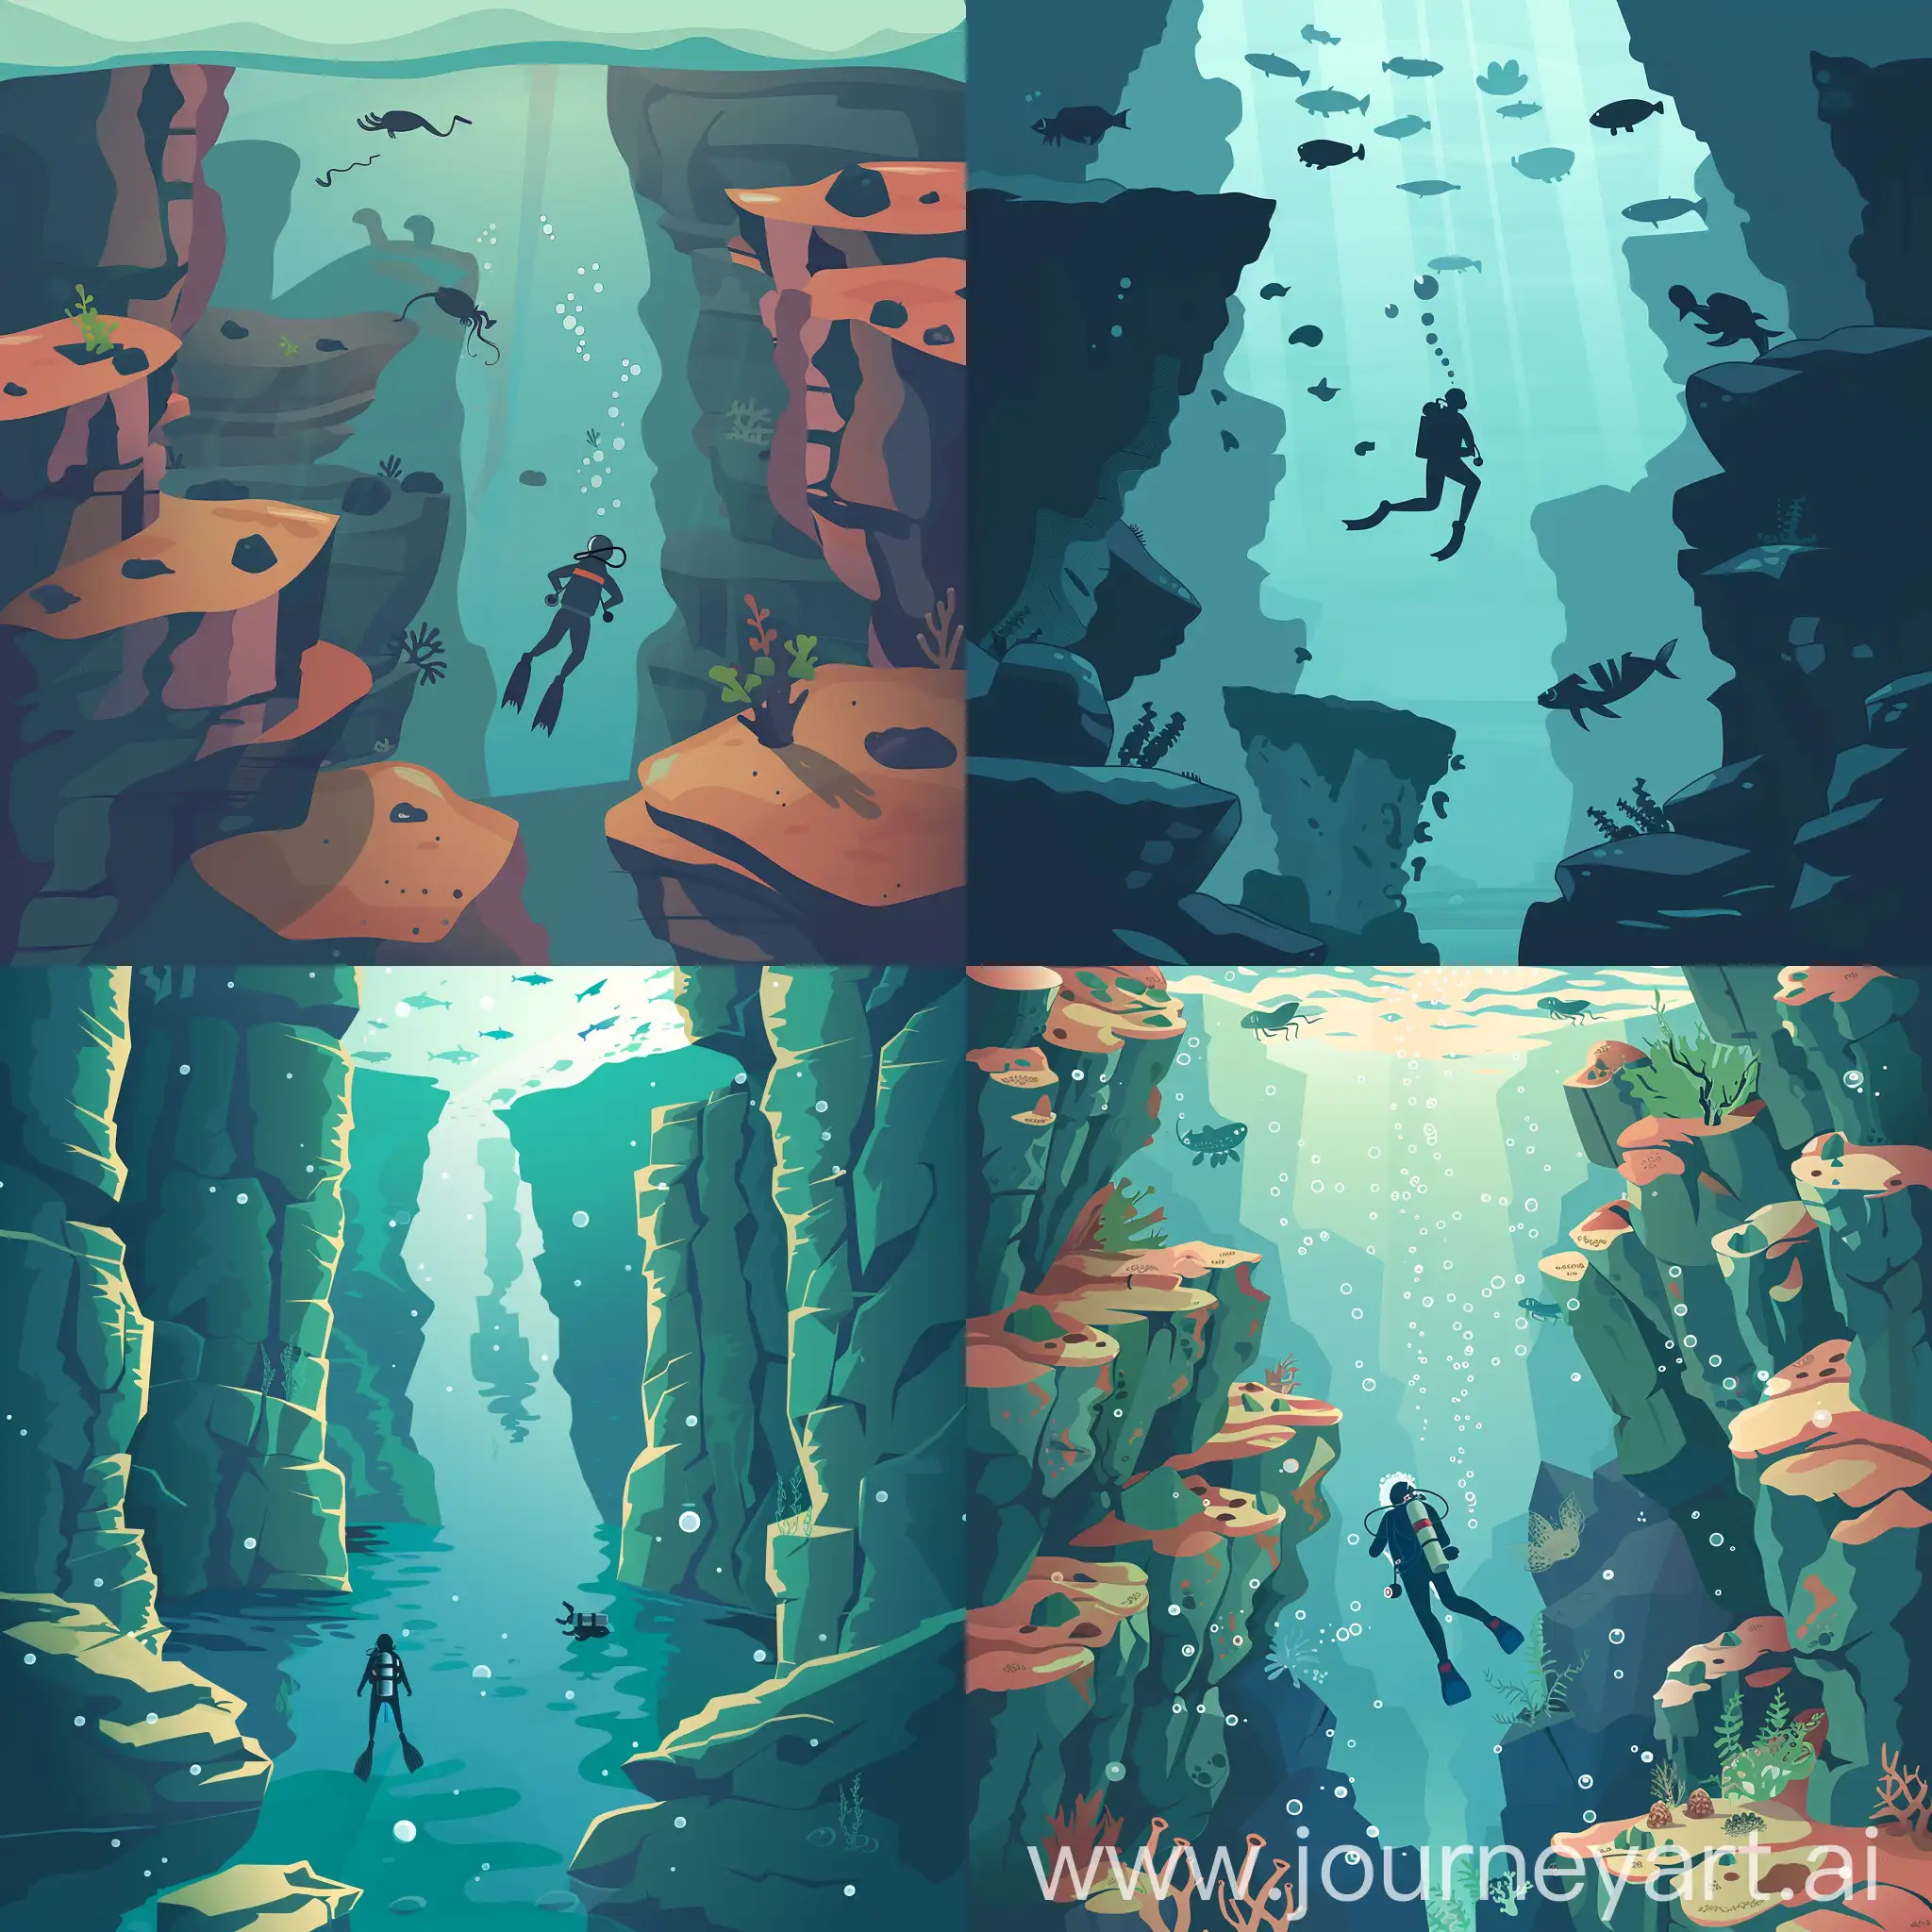 underwater day, diver go down into the deeper, around a many Rocks and cliffs, in water is other creature, in flat style, high quality details